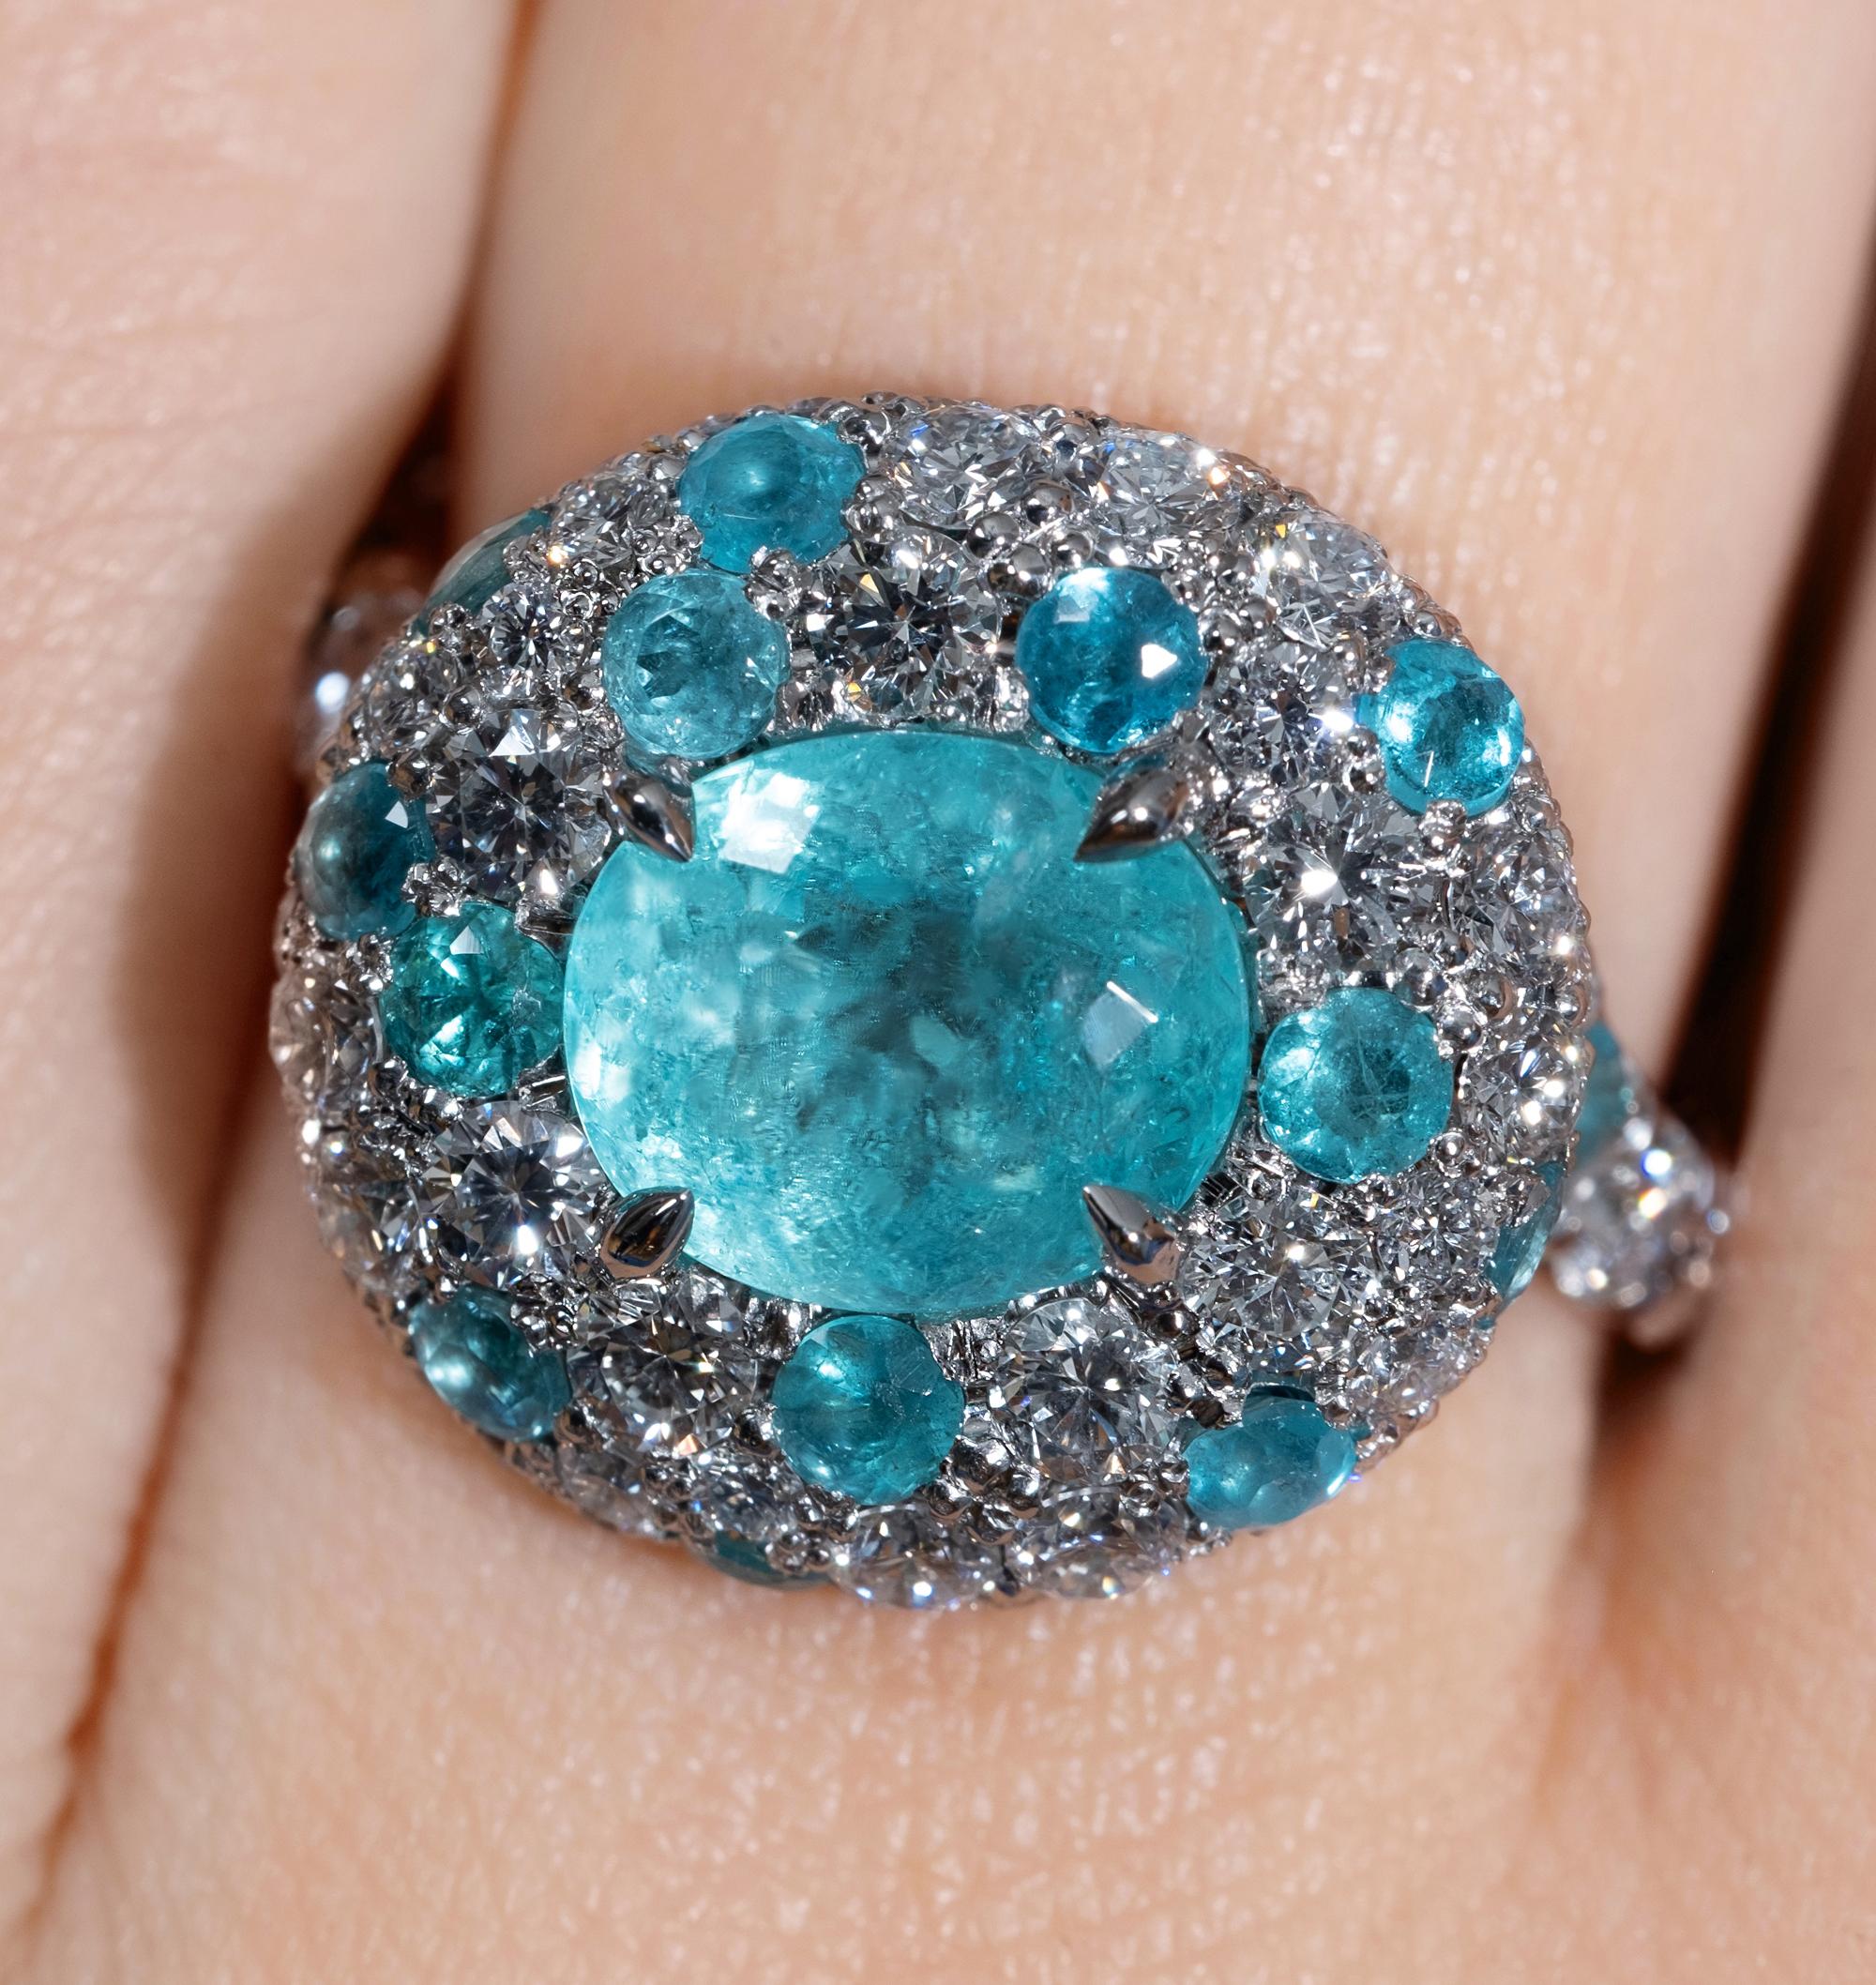 Highly collectable 5ctw Natural Paraiba Tourmaline and Diamond Platinum Ring, GIA CERTIFIED.

A high-fashion ring from another planet! This jewel will make a great addition to any GEM/jewelry collection or a perfect alternative for the Modern